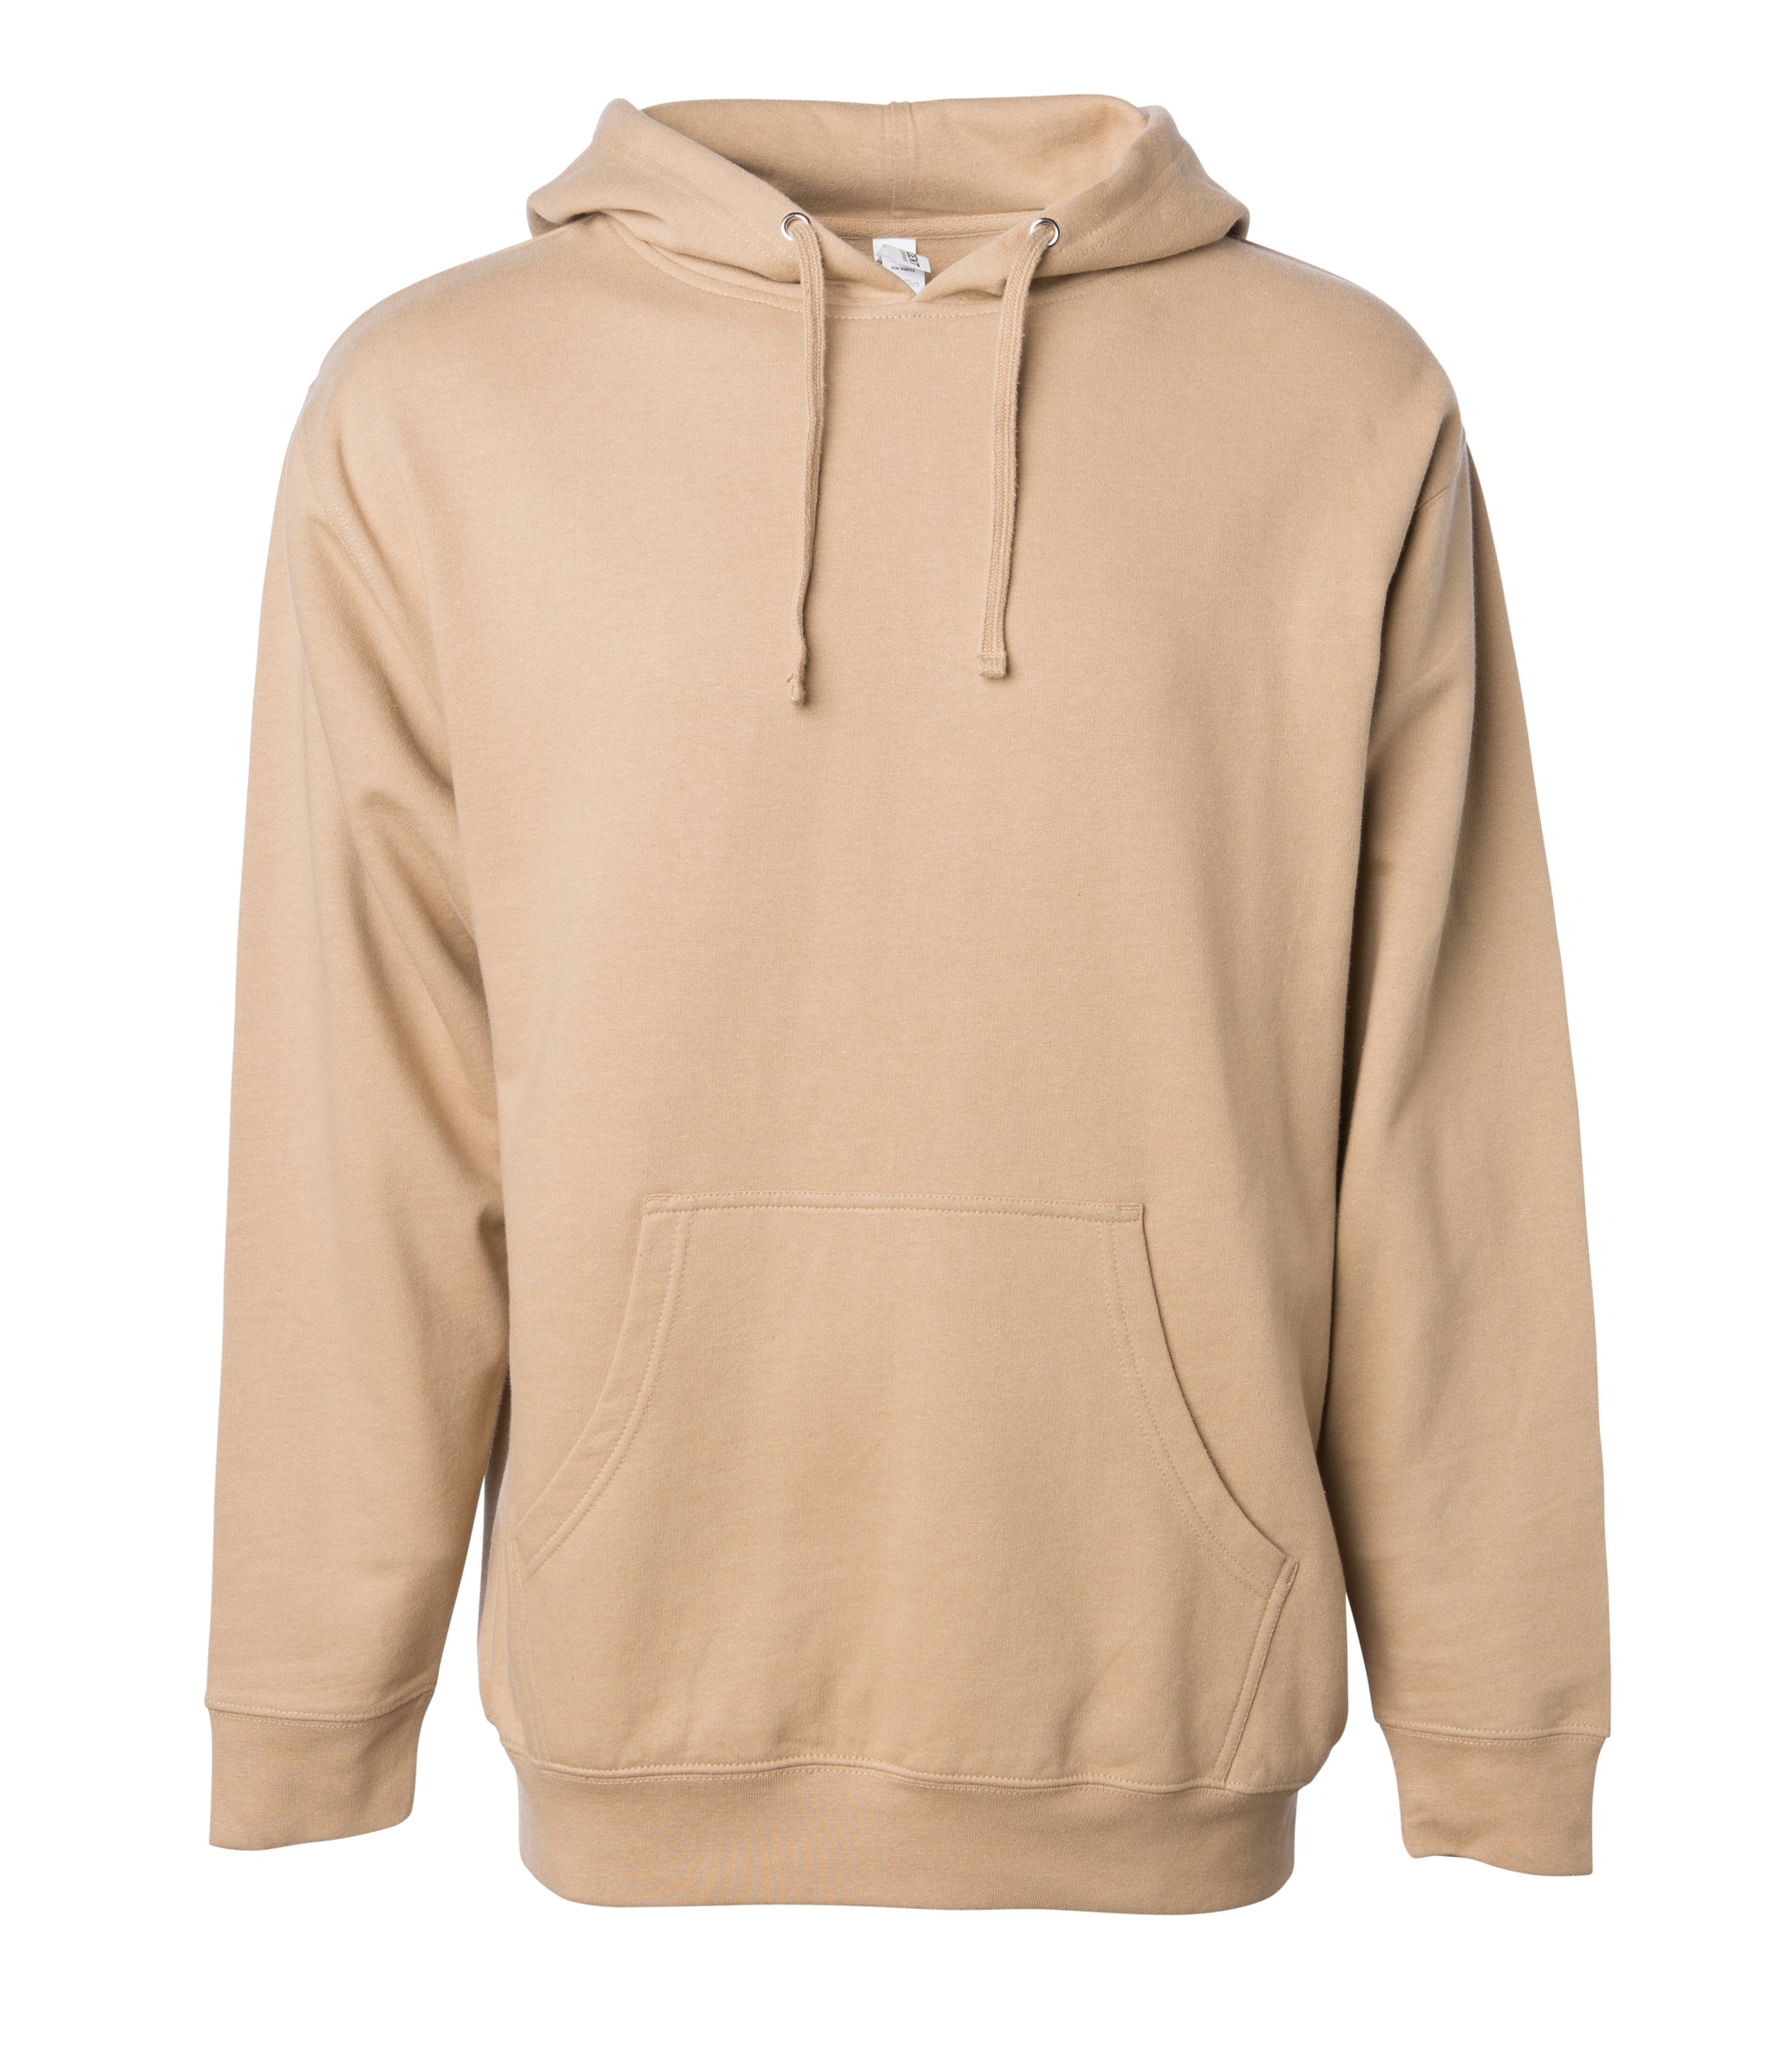 4XL & 5XL Midweight Hooded Pullover Sweatshirts | Independent Trading ...